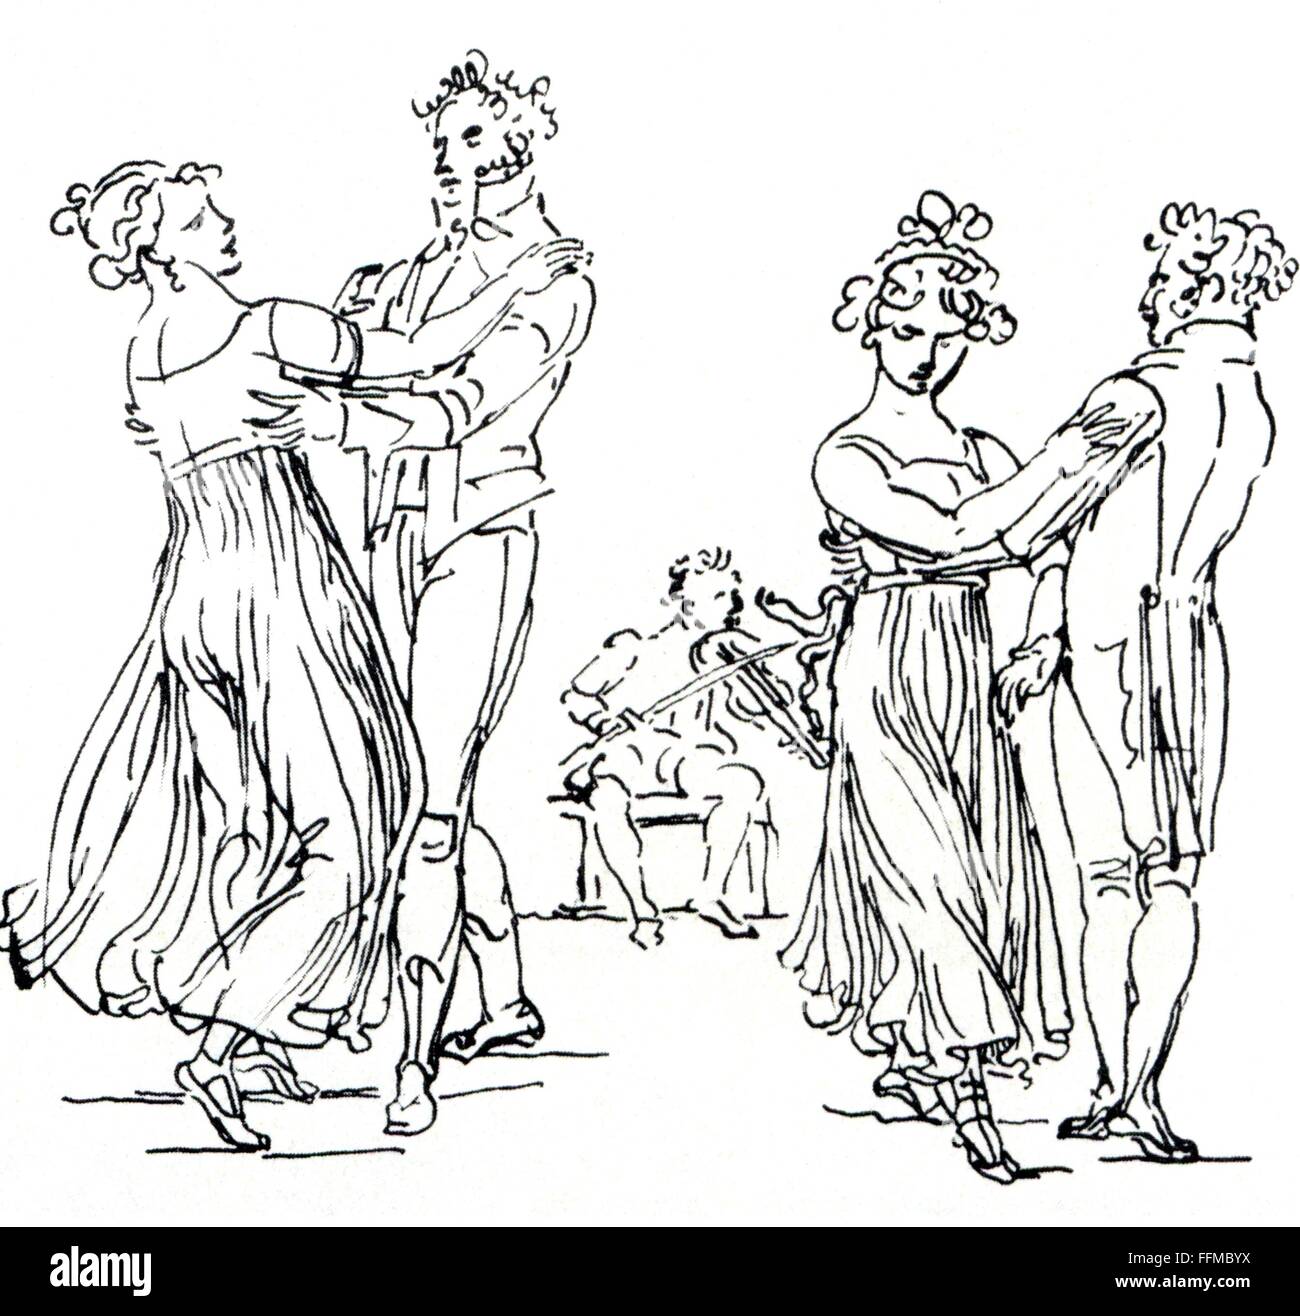 people, couples, dancing couples, drawing by Johann Gottfried Schadow, serial 'Berlin Types', early 19th century, Additional-Rights-Clearences-Not Available Stock Photo